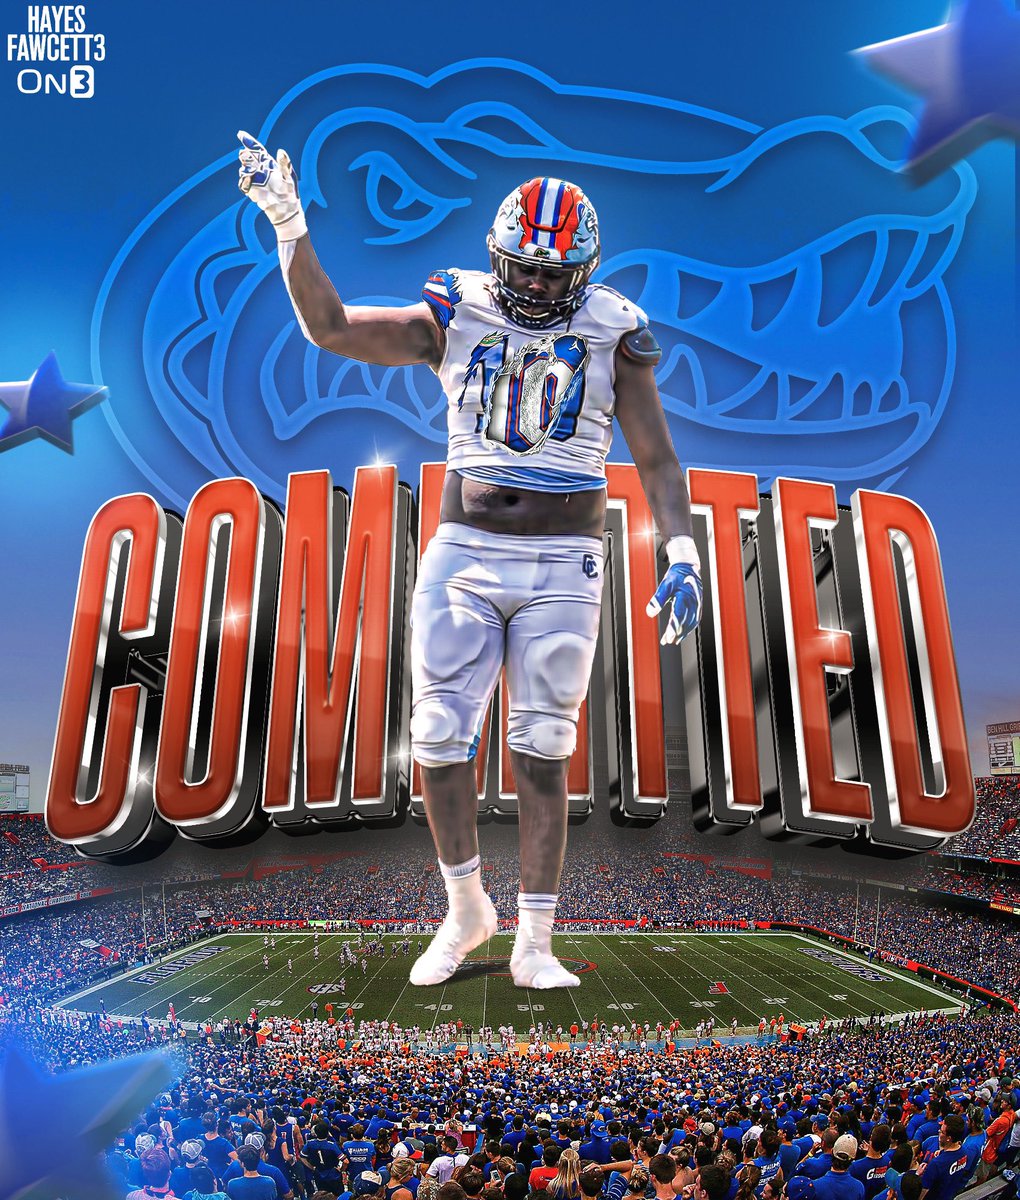 BREAKING: Class of 2025 DL Jeramiah McCloud has Committed to Florida, he tells me for @on3recruits The 6’4 300 DL from Havana, FL was previously Committed to Mississippi State “I know I’m the motivation they see me they see a hero ✈️” on3.com/db/jeramiah-mc…